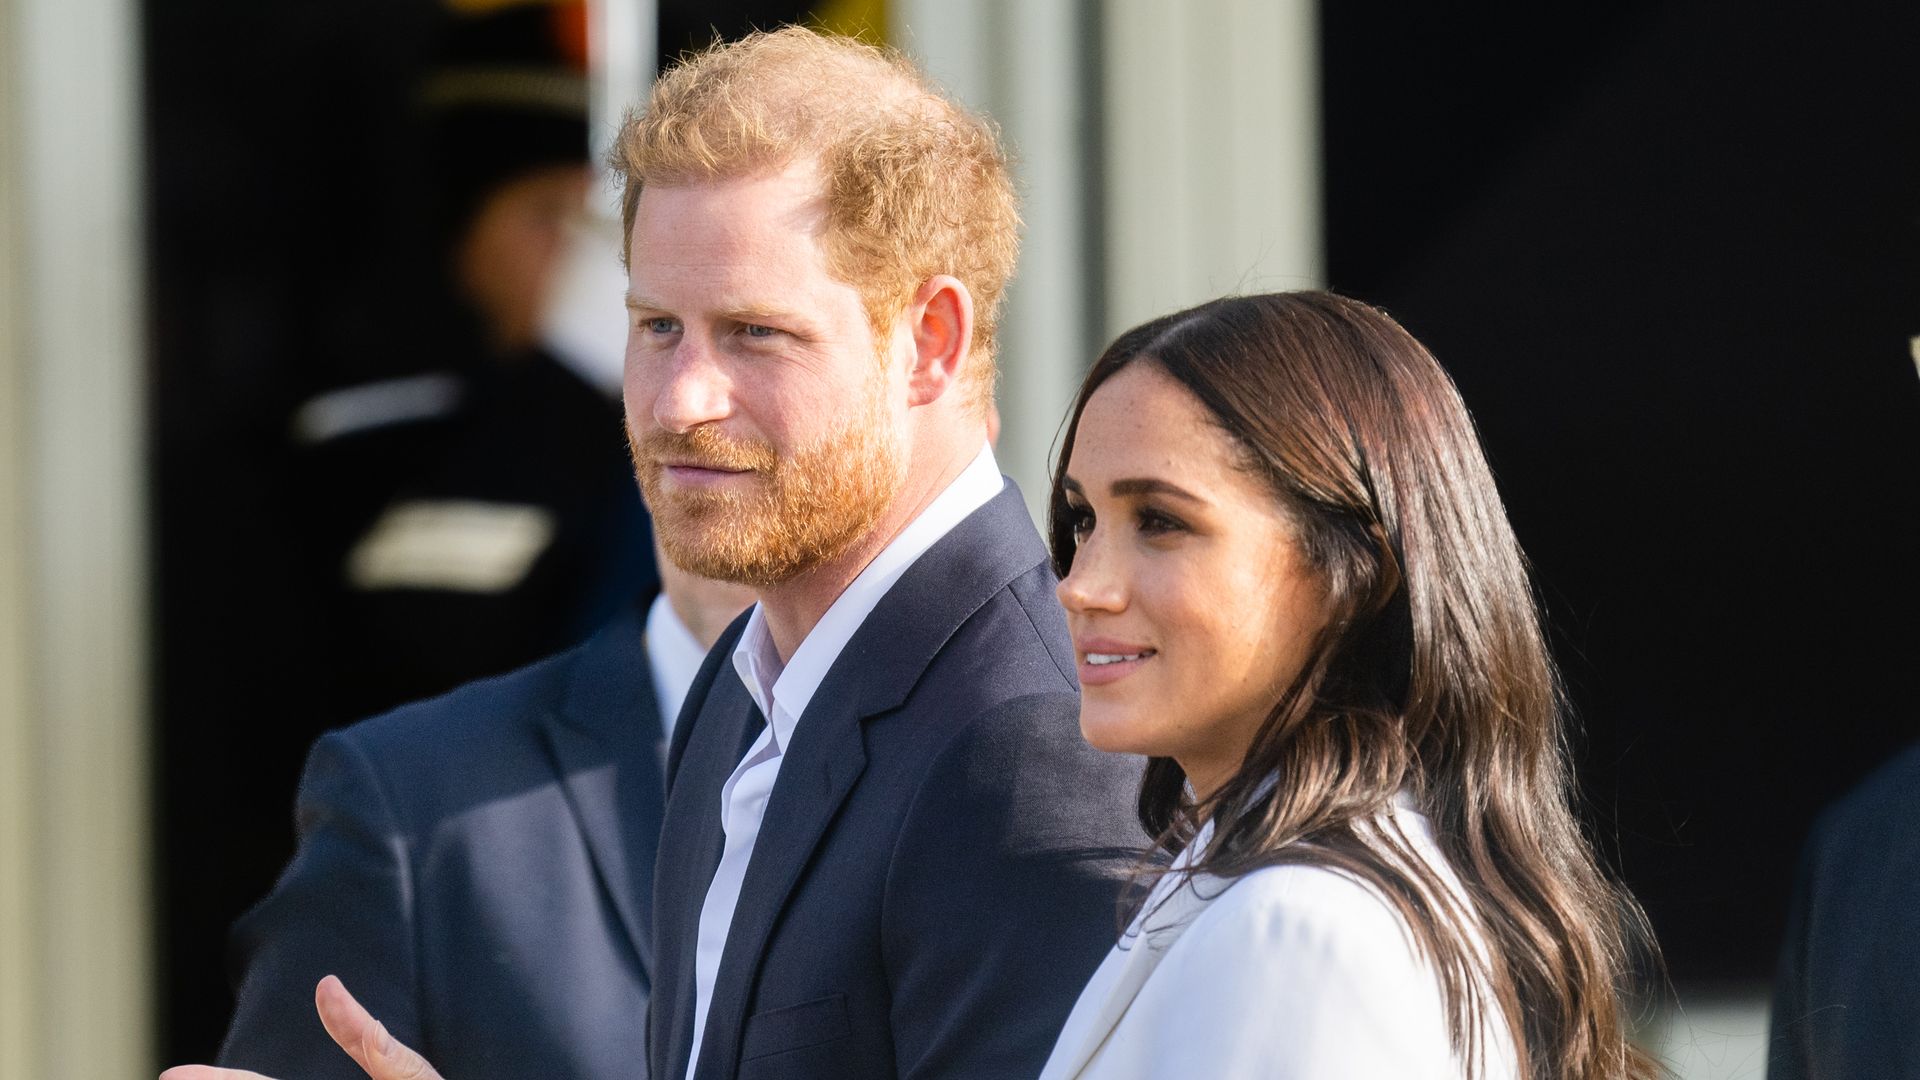 Meghan Markle and Prince Harry's Archewell Foundation declared 'delinquent' in surprising update